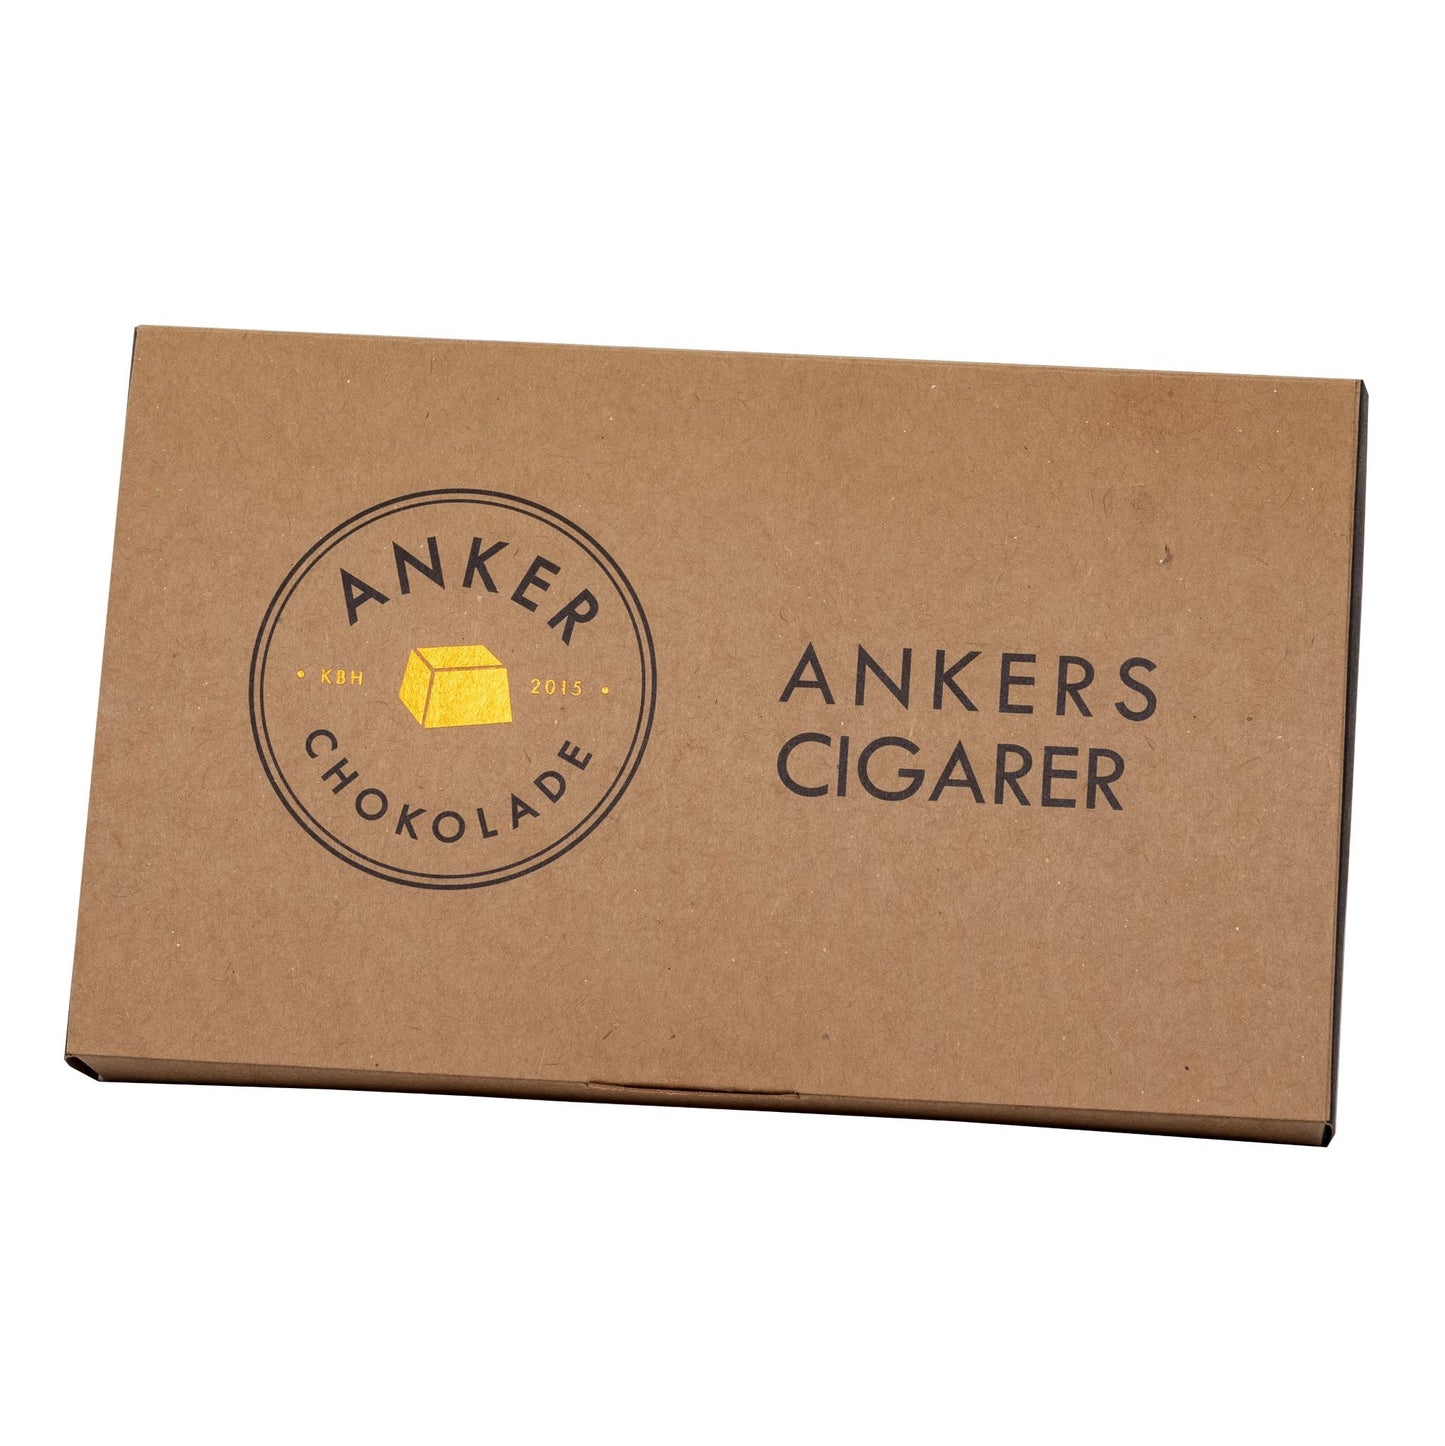 Ankers  Cigarer - 4 stk